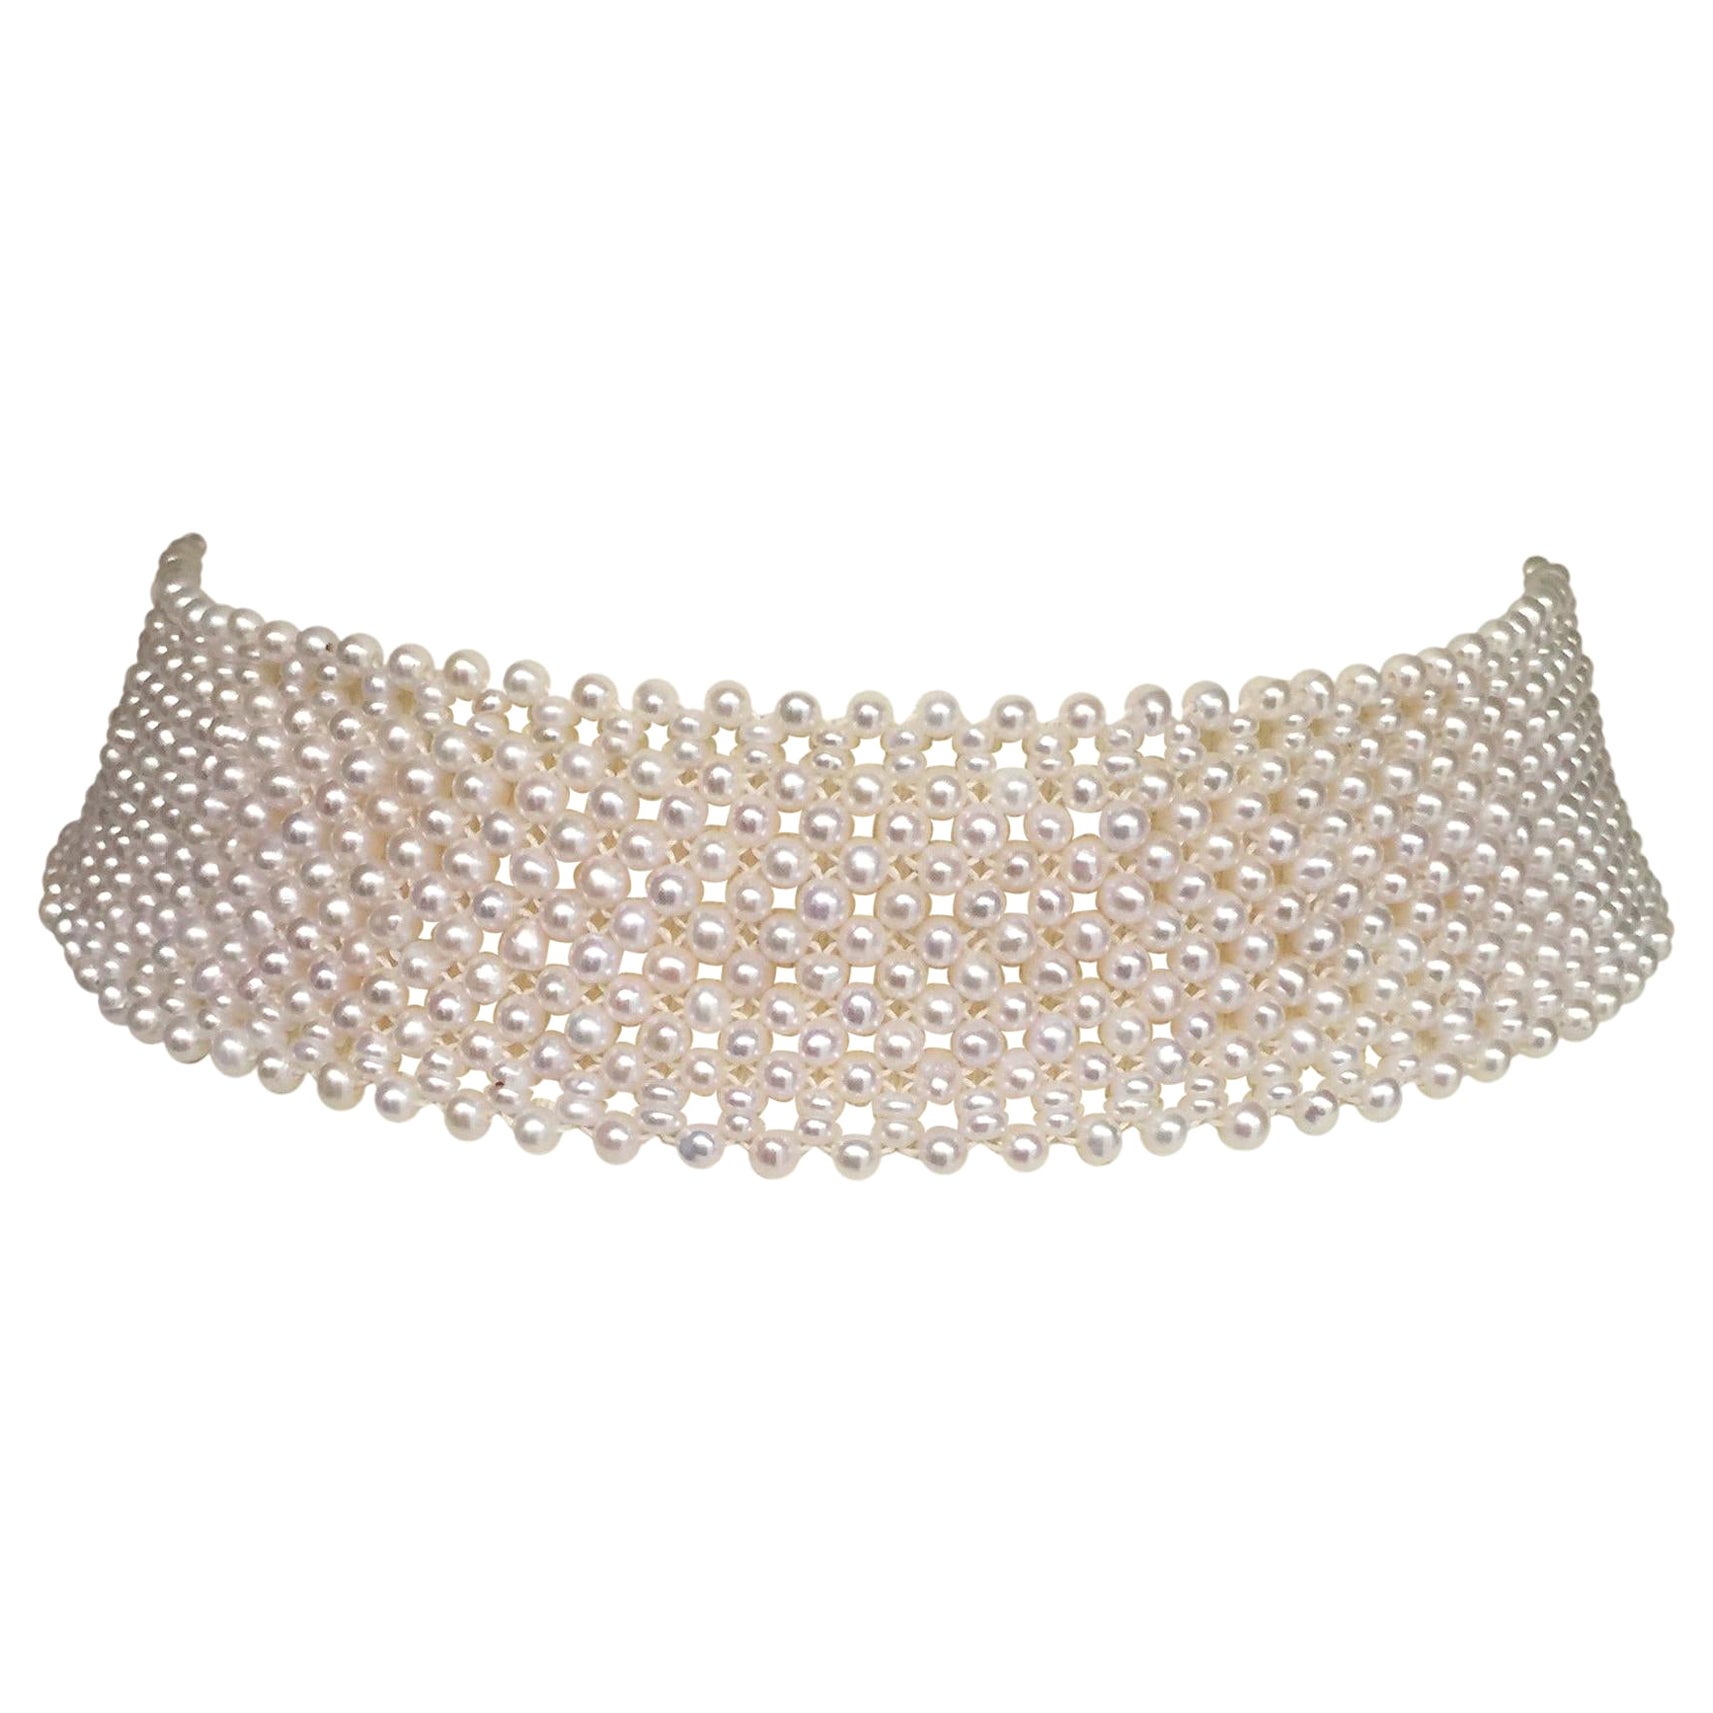 Marina J Woven Wide White Pearl Choker with 14 k White Gold Sliding Clasp